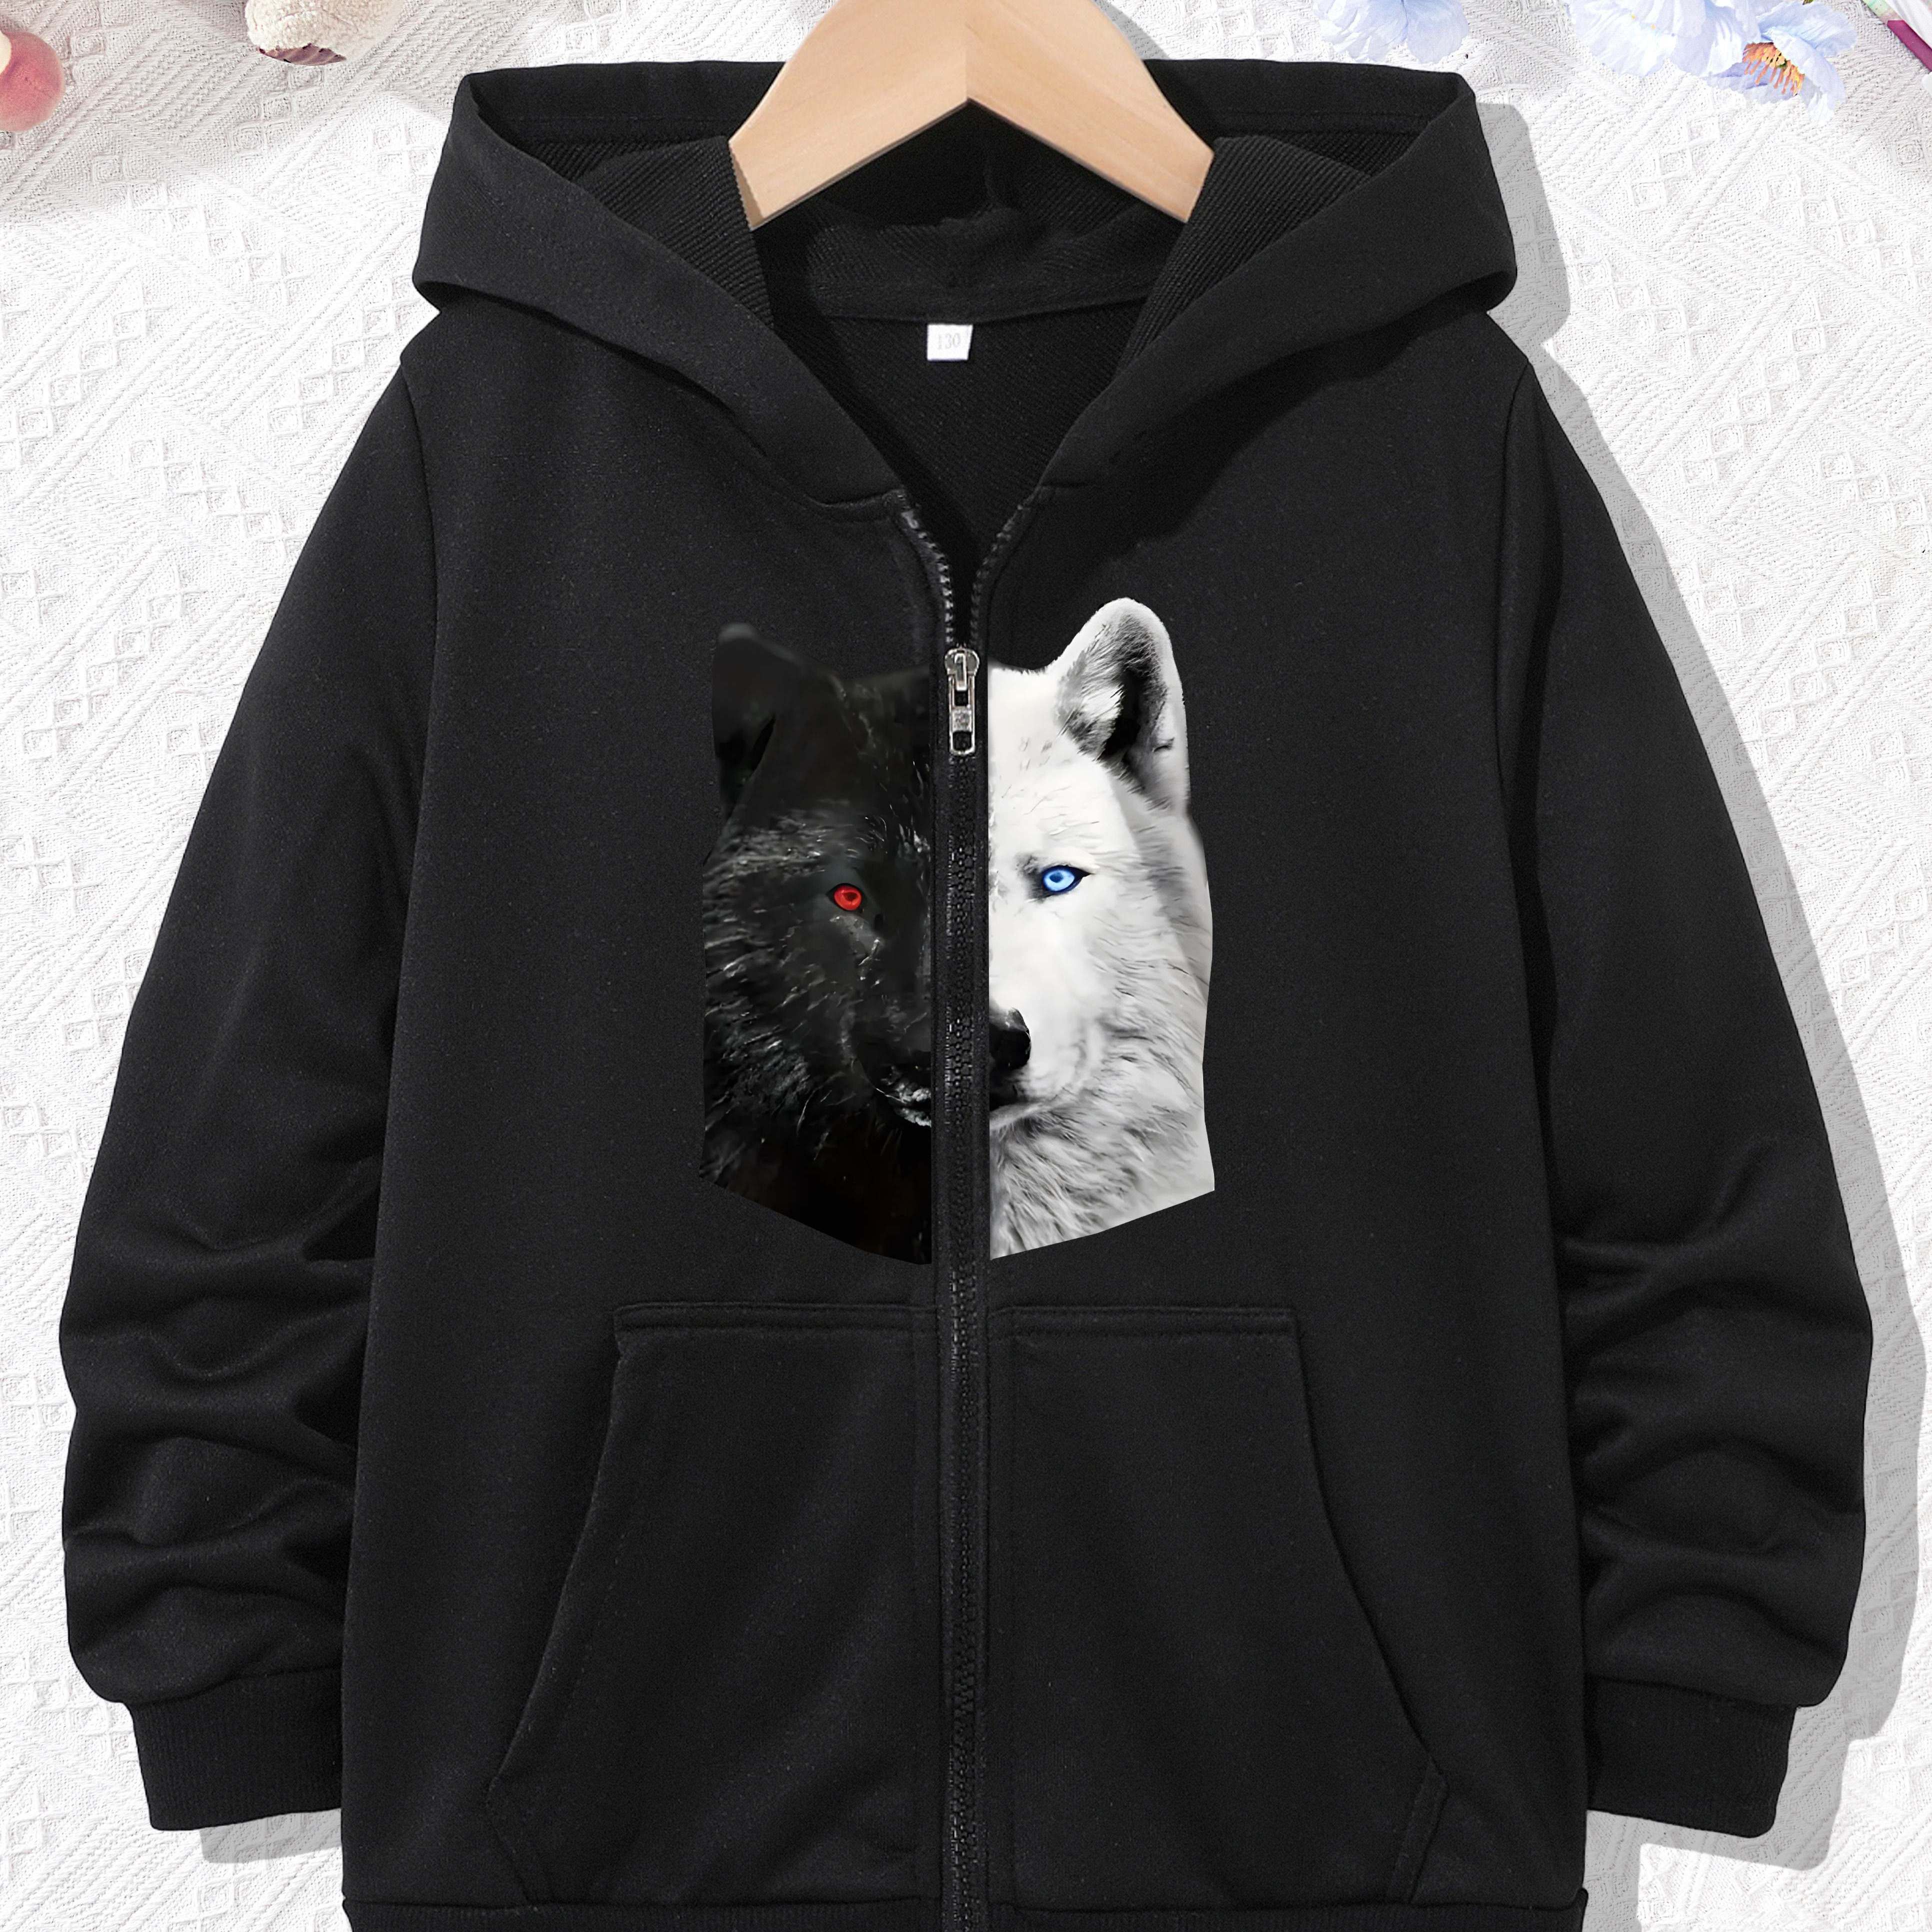 

Boys Girls Zip-up Trendy Wolf Graphic Hoodie, Pockets Front Loose Comfy Casual Jacket Sweatshirt For Spring Fall